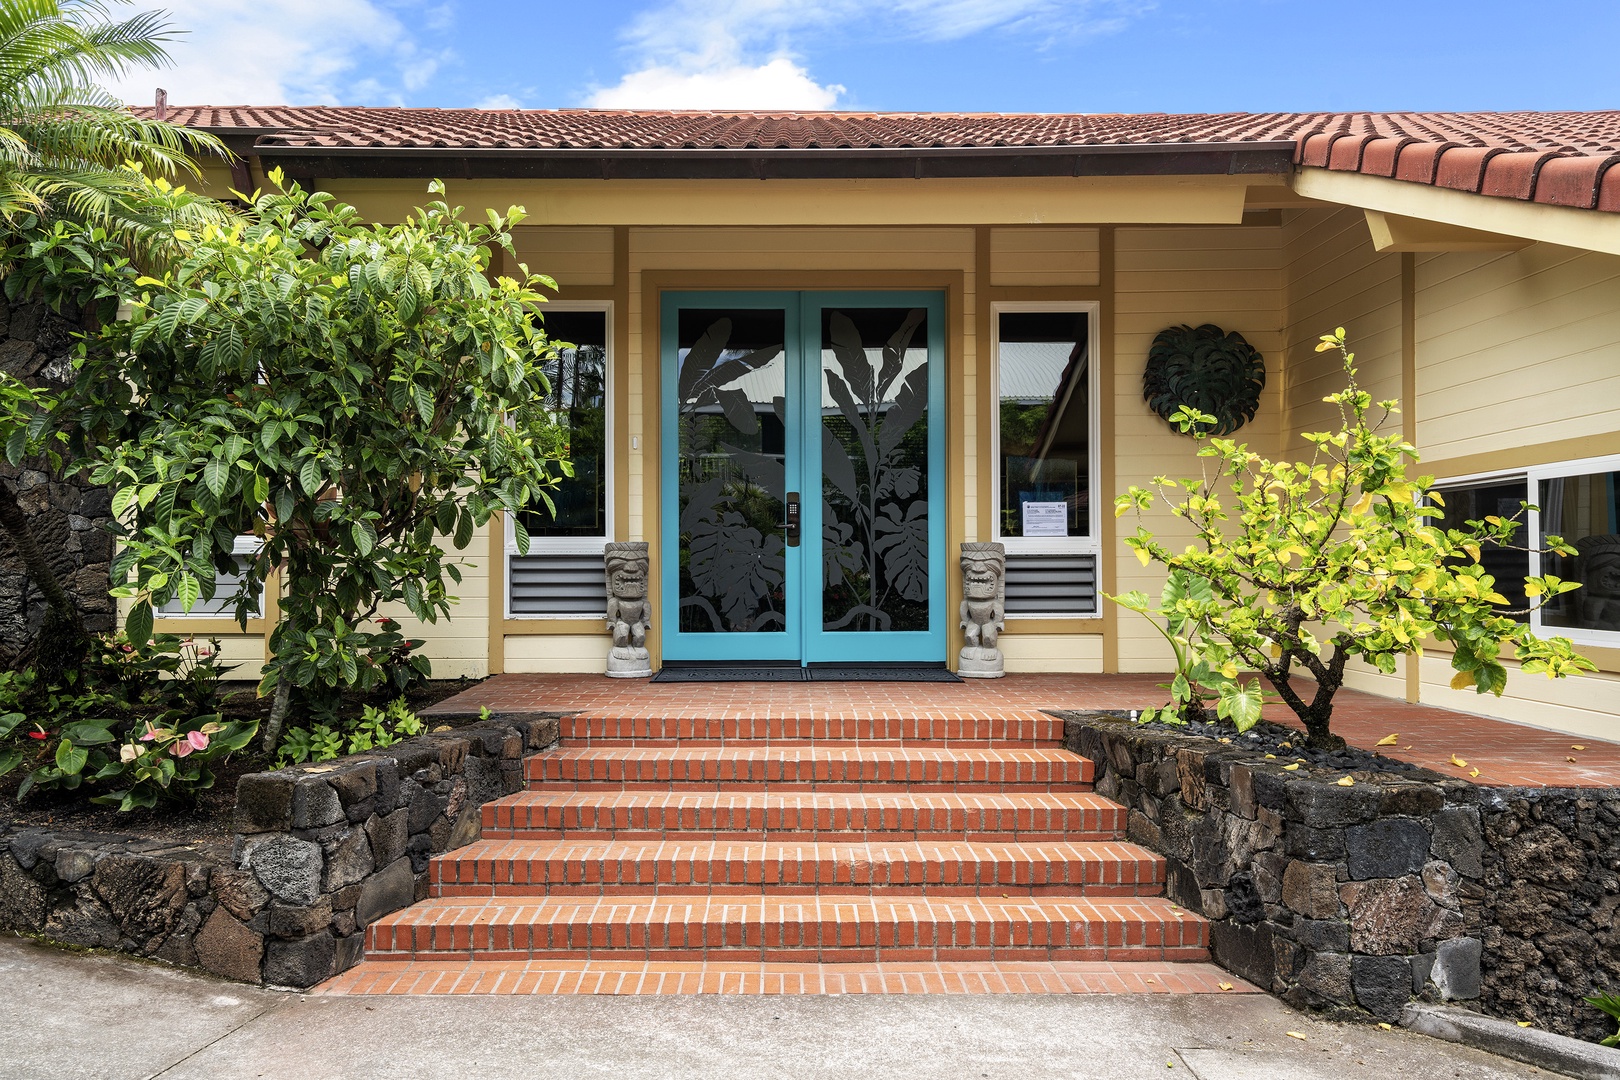 Kailua Kona Vacation Rentals, Hale Pua - Entertainment Room Entrance equipped with keyless entry